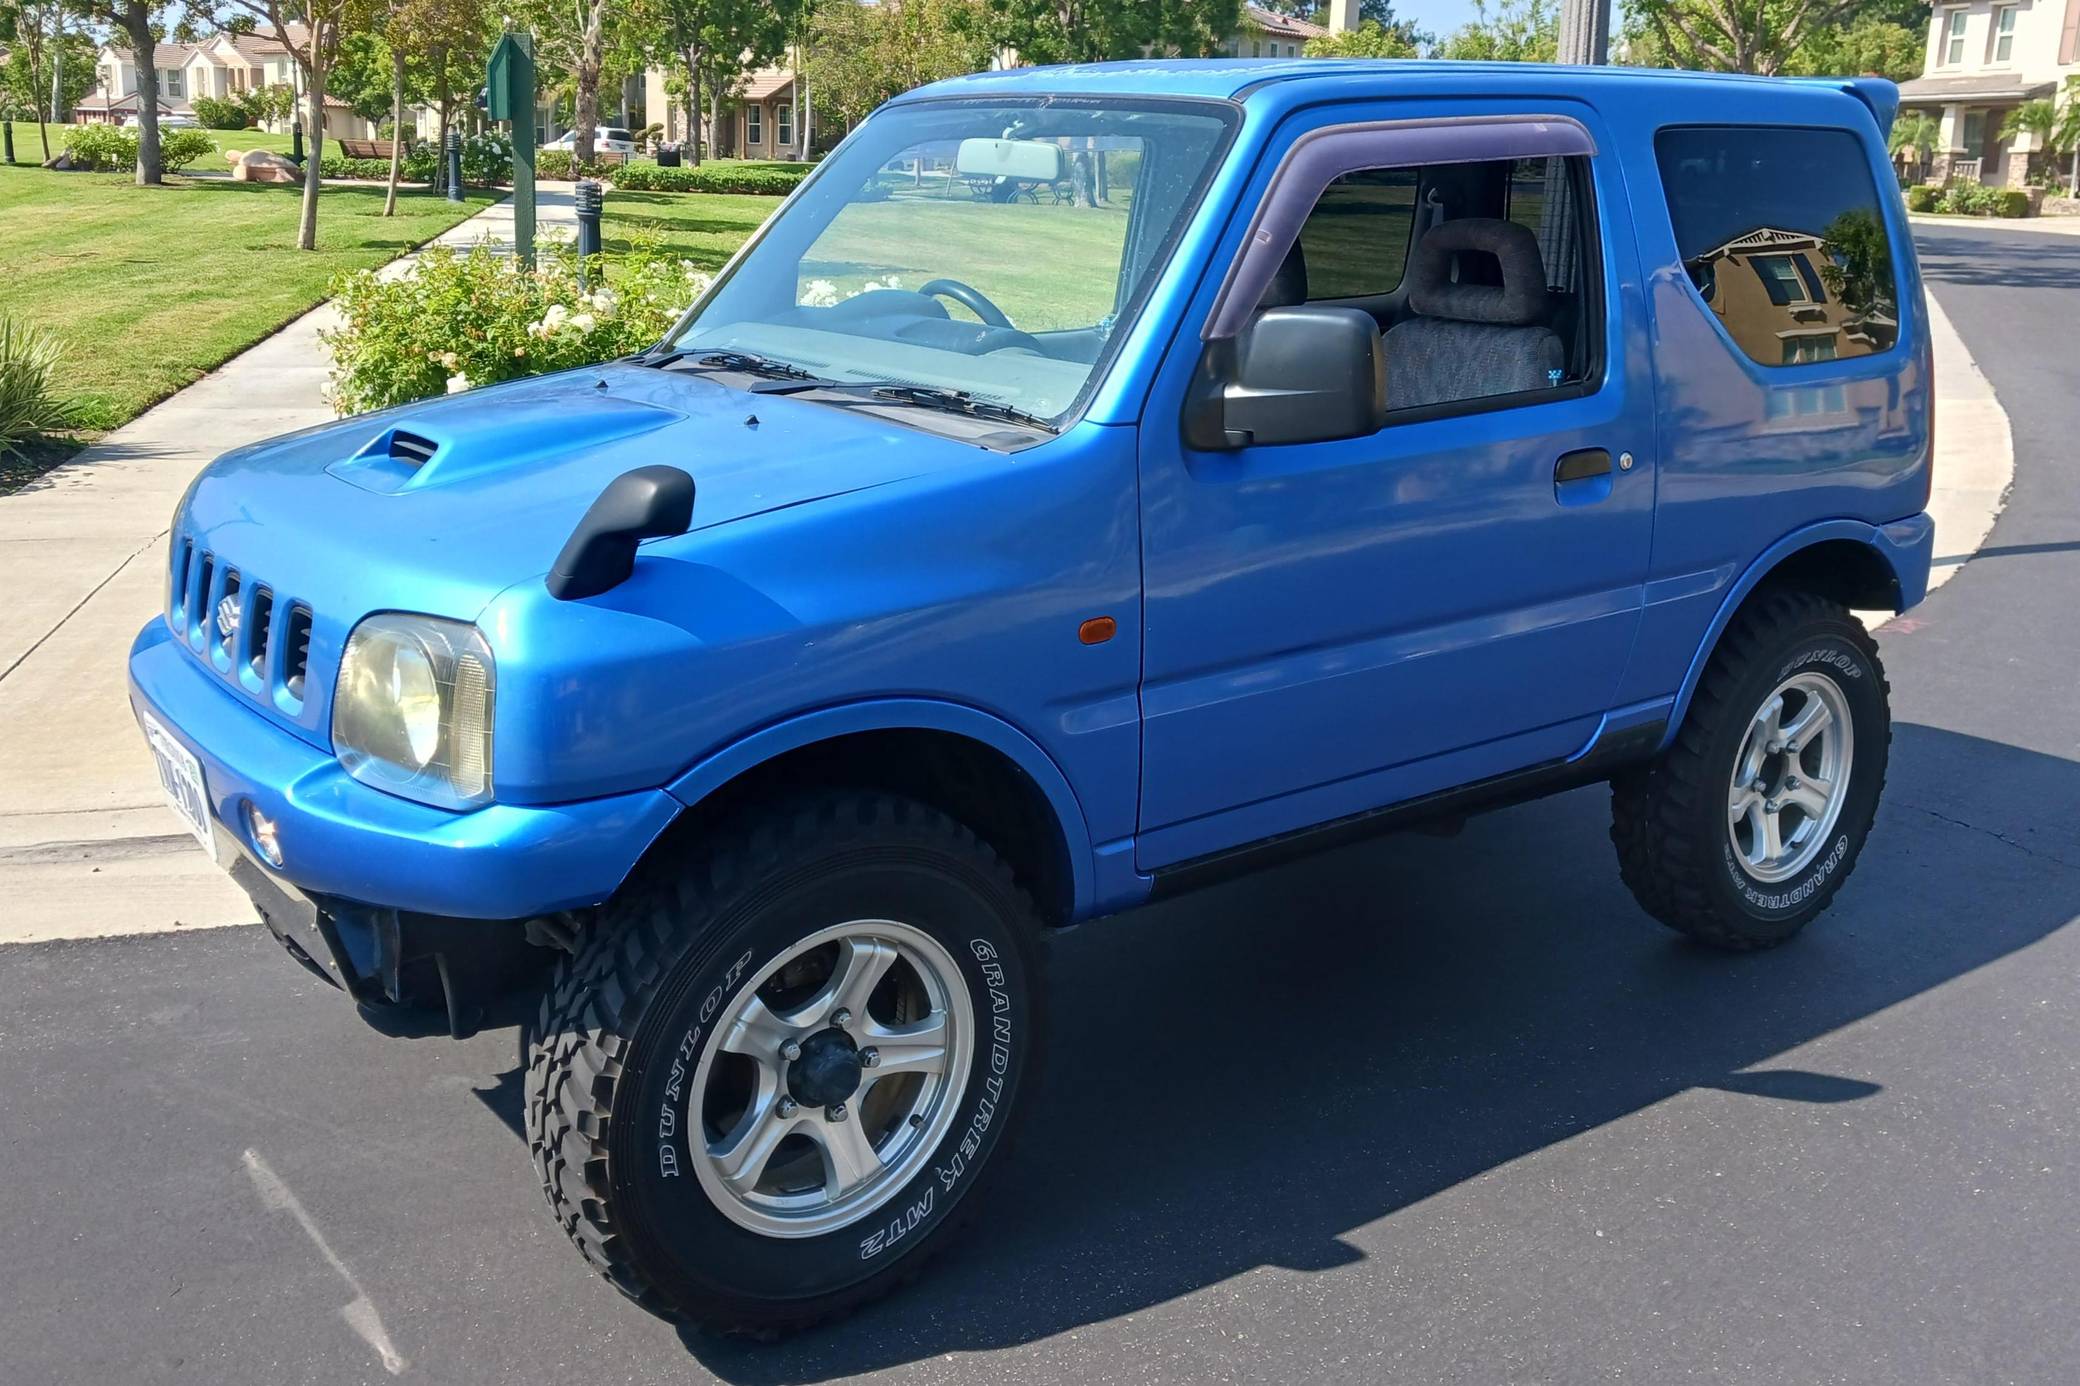 Used SUZUKI JIMNY 2023/Aug CFJ8976273 in good condition for sale